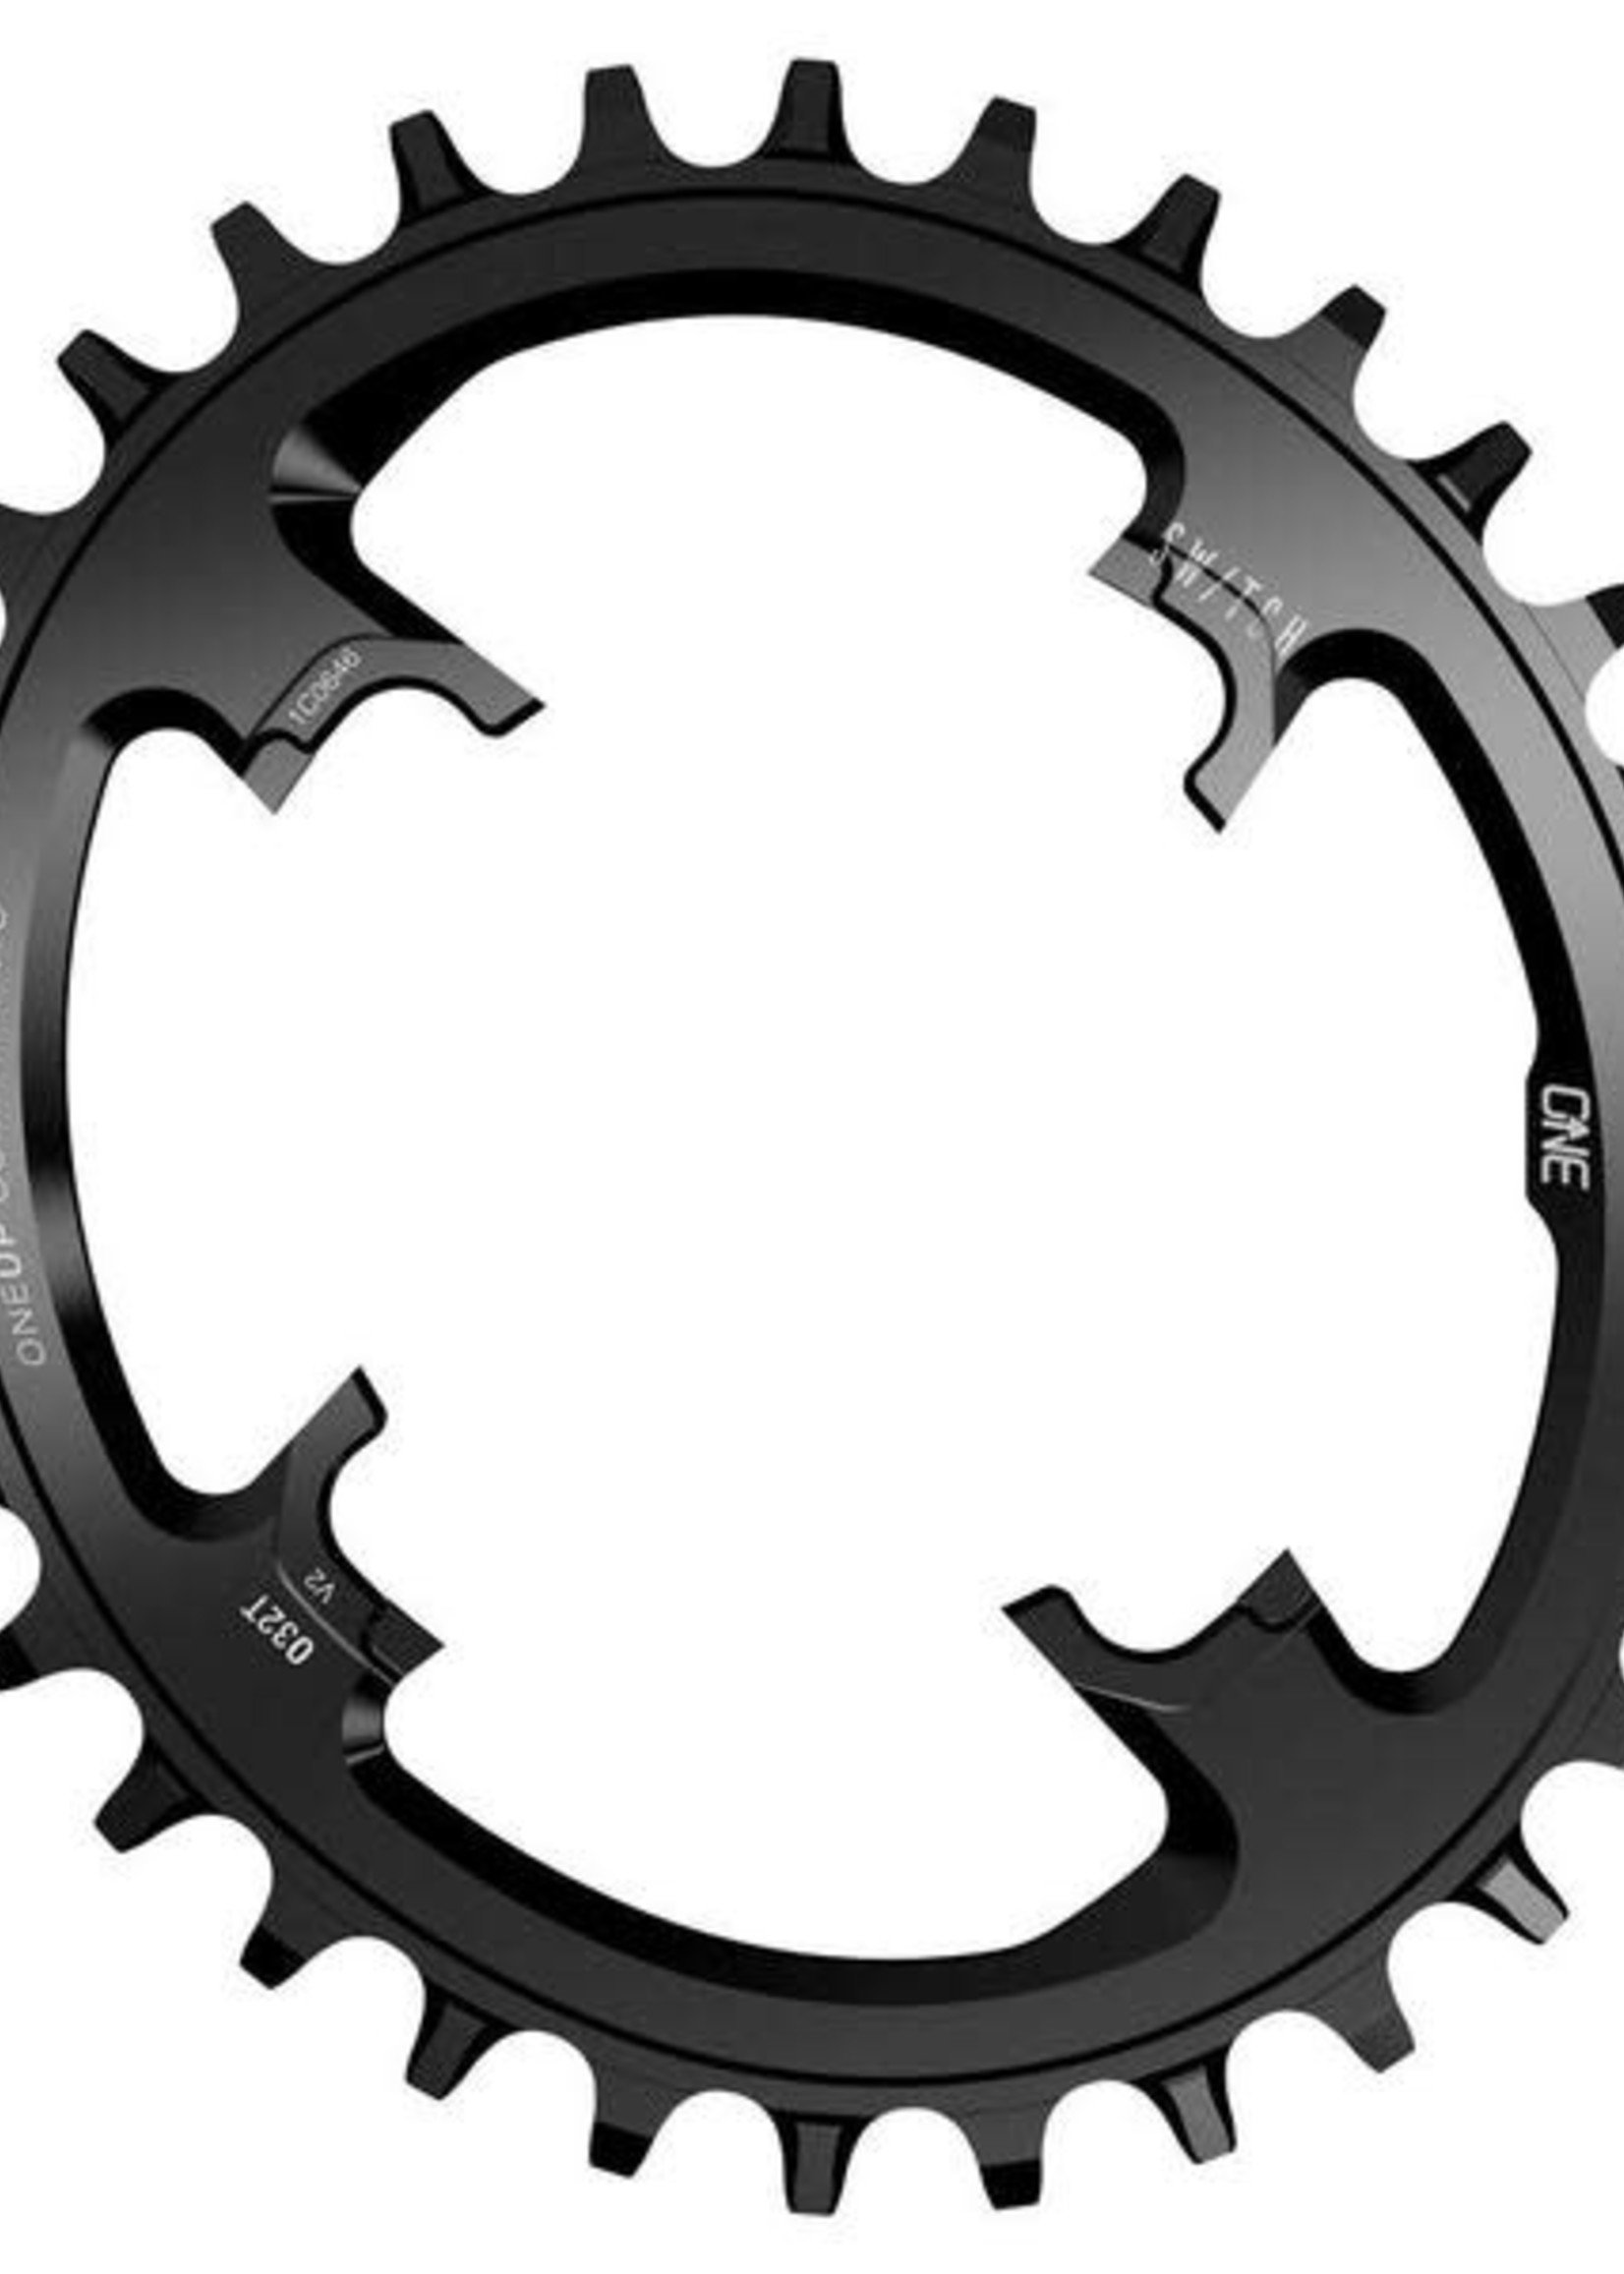 ONEUP ONEUP CHAINRING V2 SWITCH 10/11/12SPD